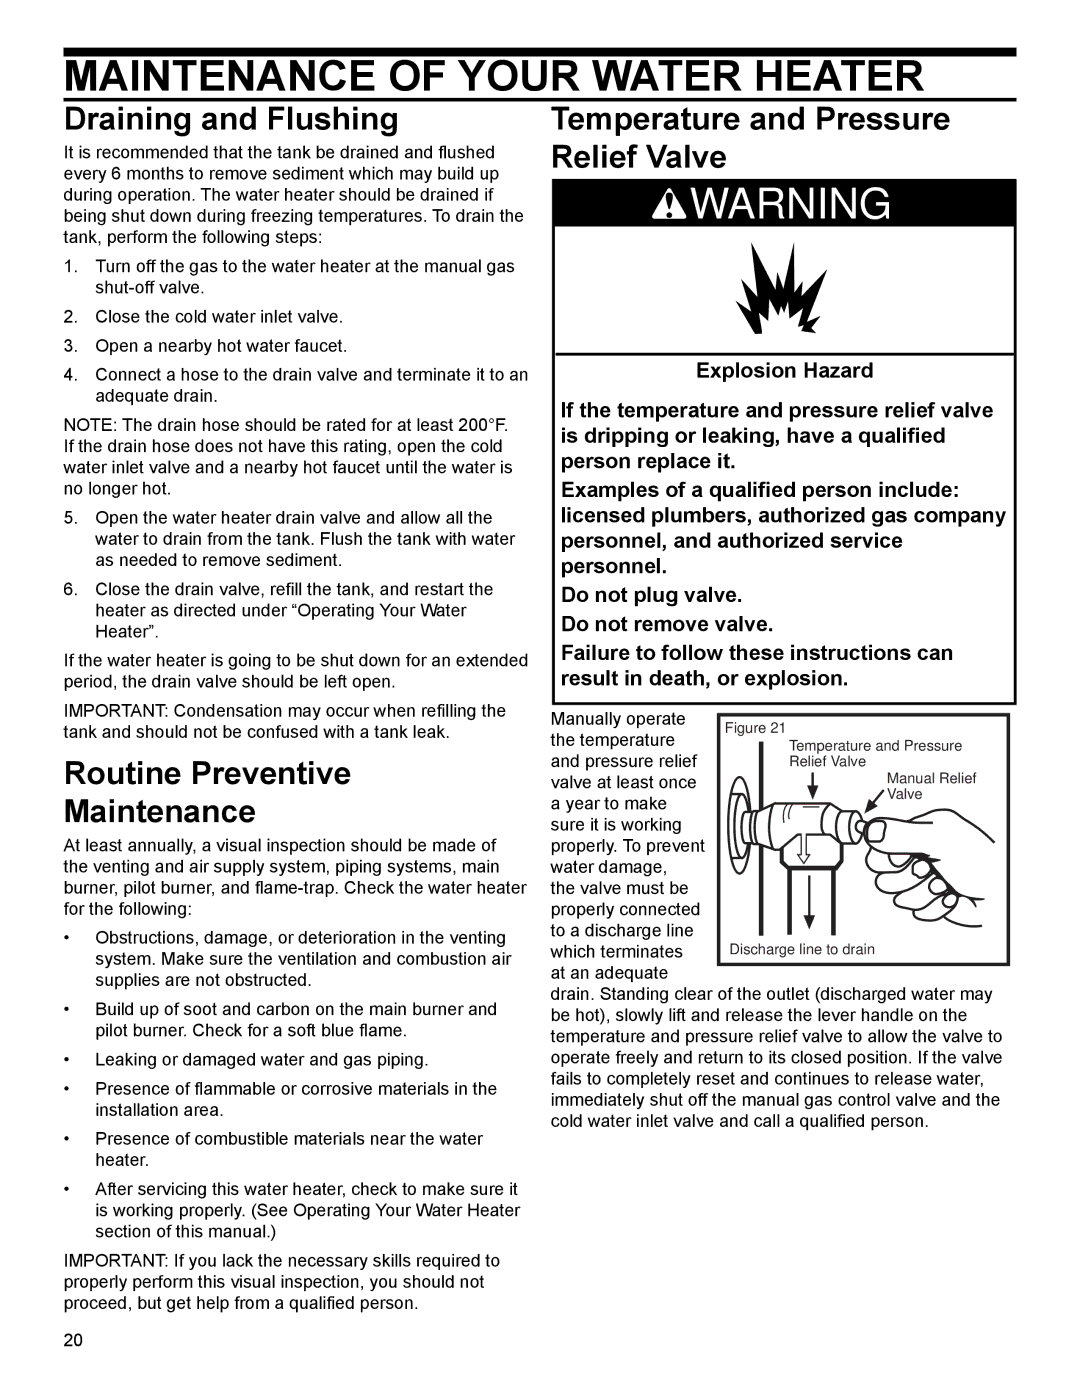 Whirlpool 315420-000, W10100910 Maintenance of Your Water Heater, Draining and Flushing, Routine Preventive Maintenance 